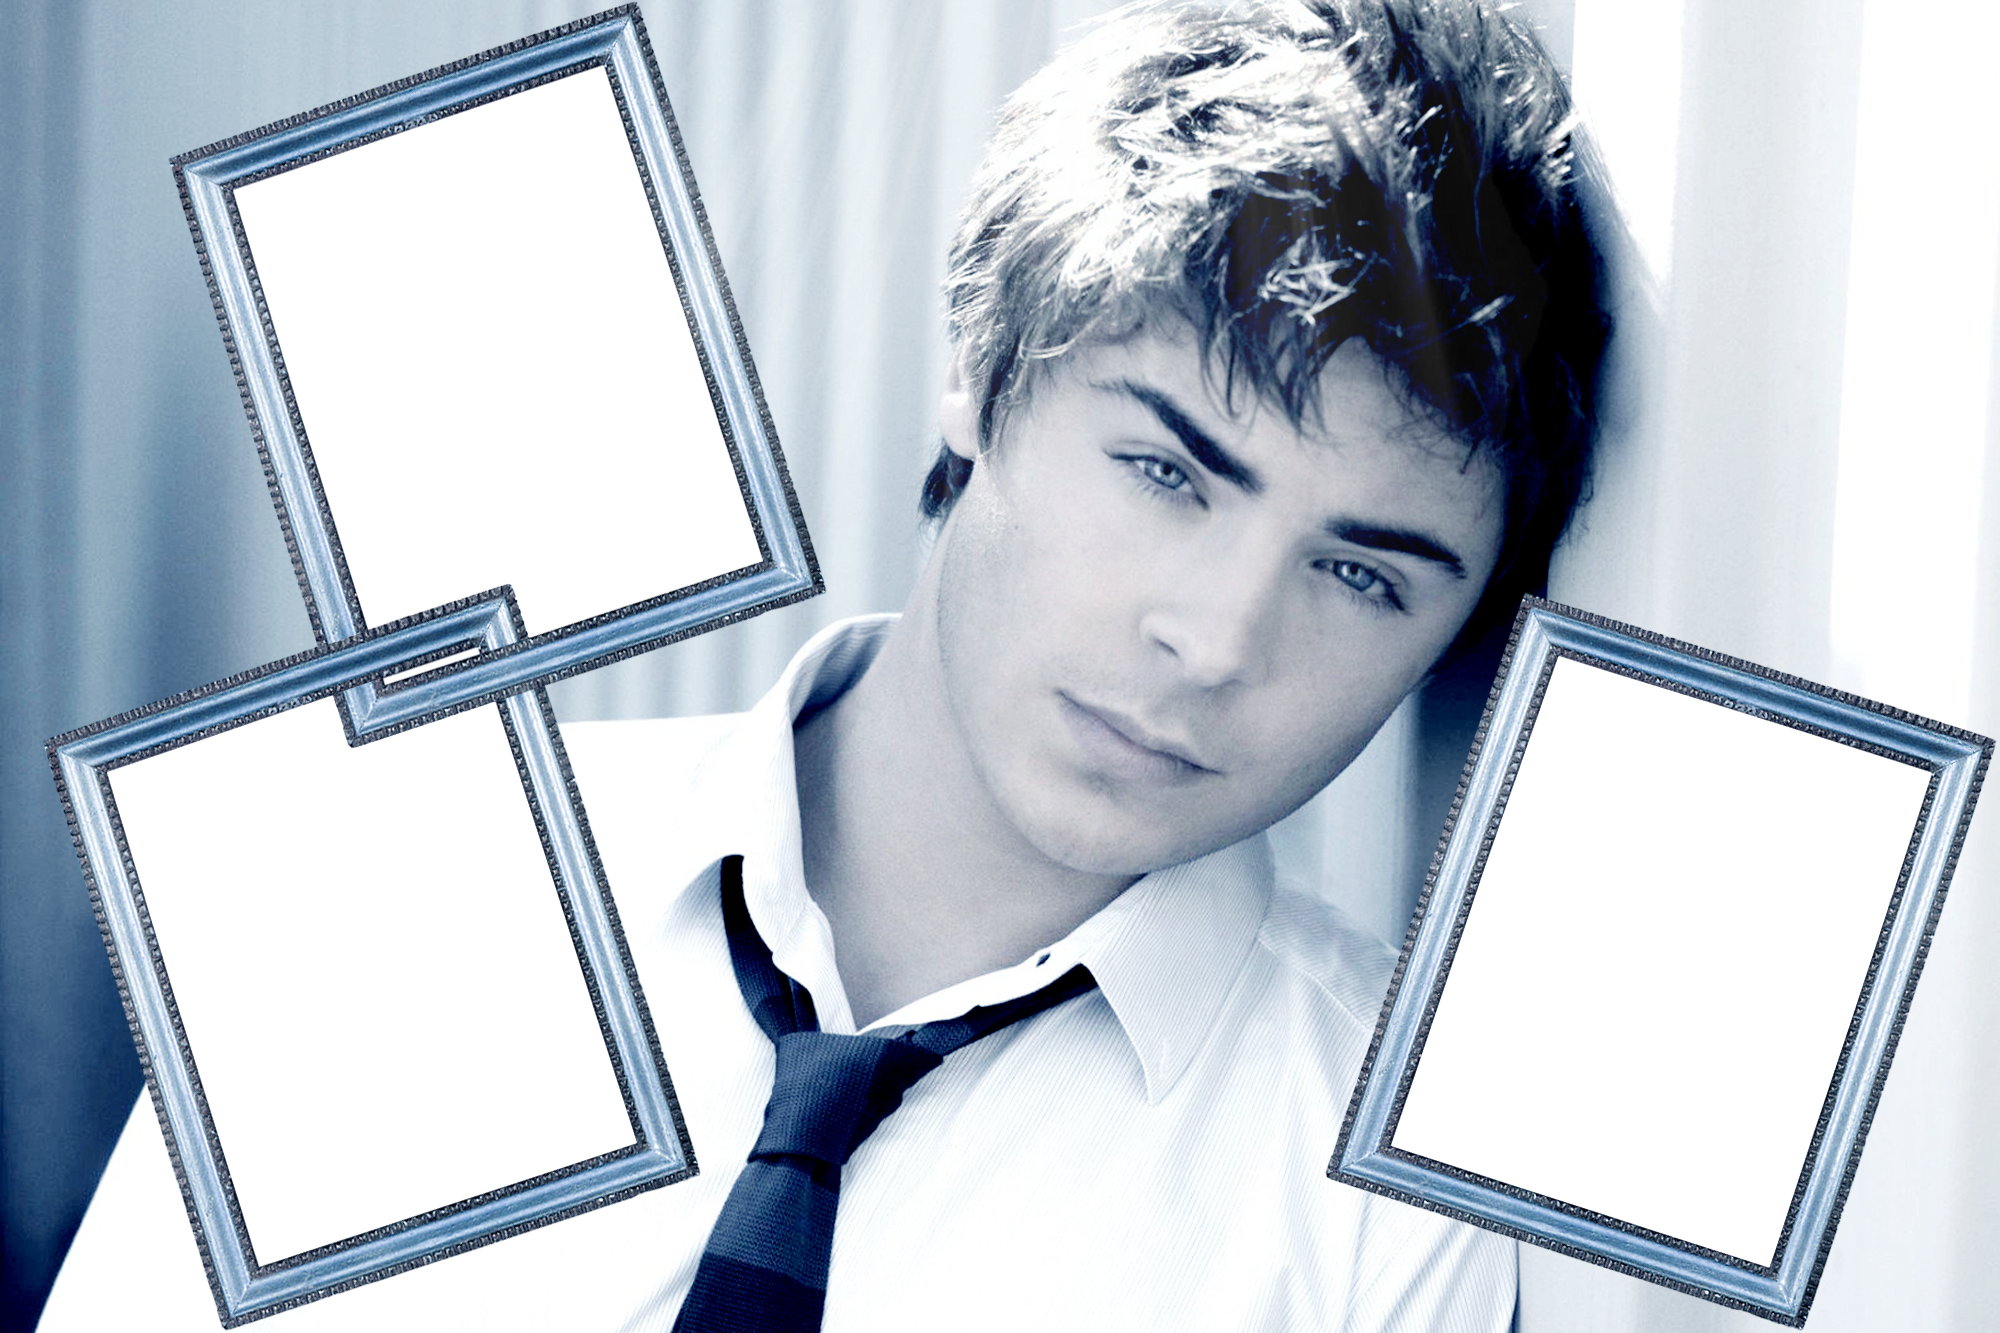 High school musical - Zac_Efron_4.png